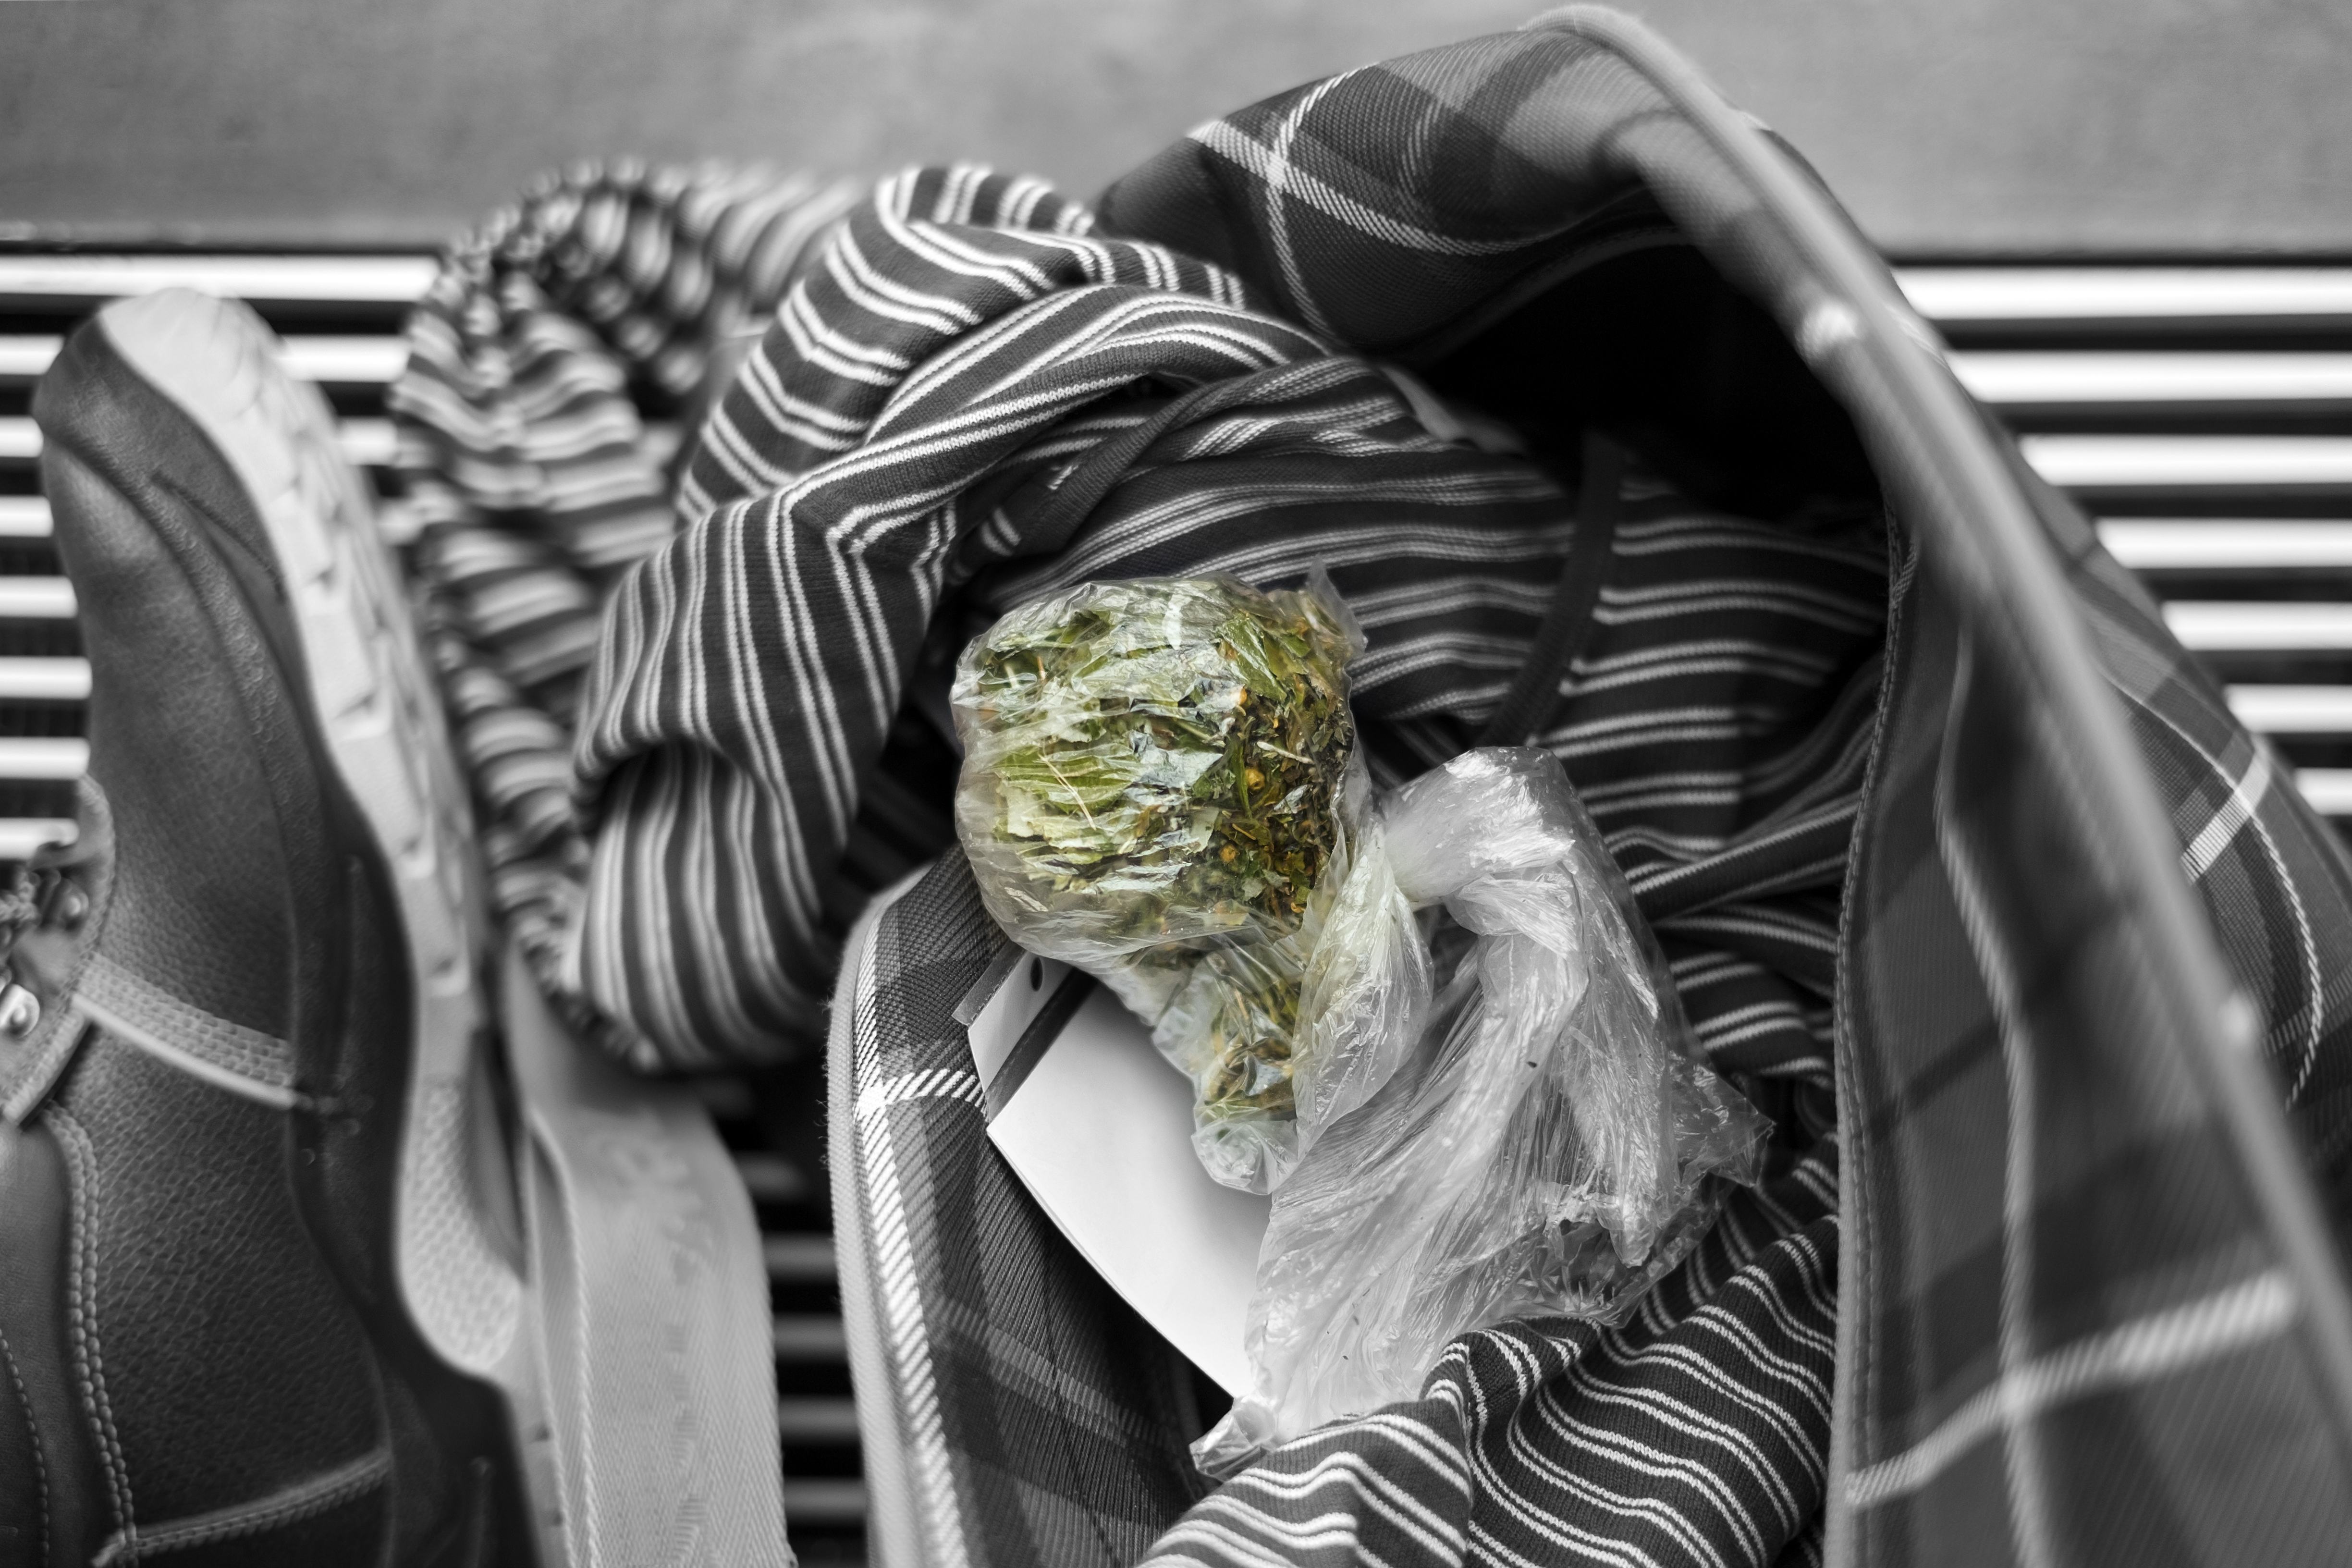 A bag of cannabis lays on top of black and gray colored clothes in an open suitcase.